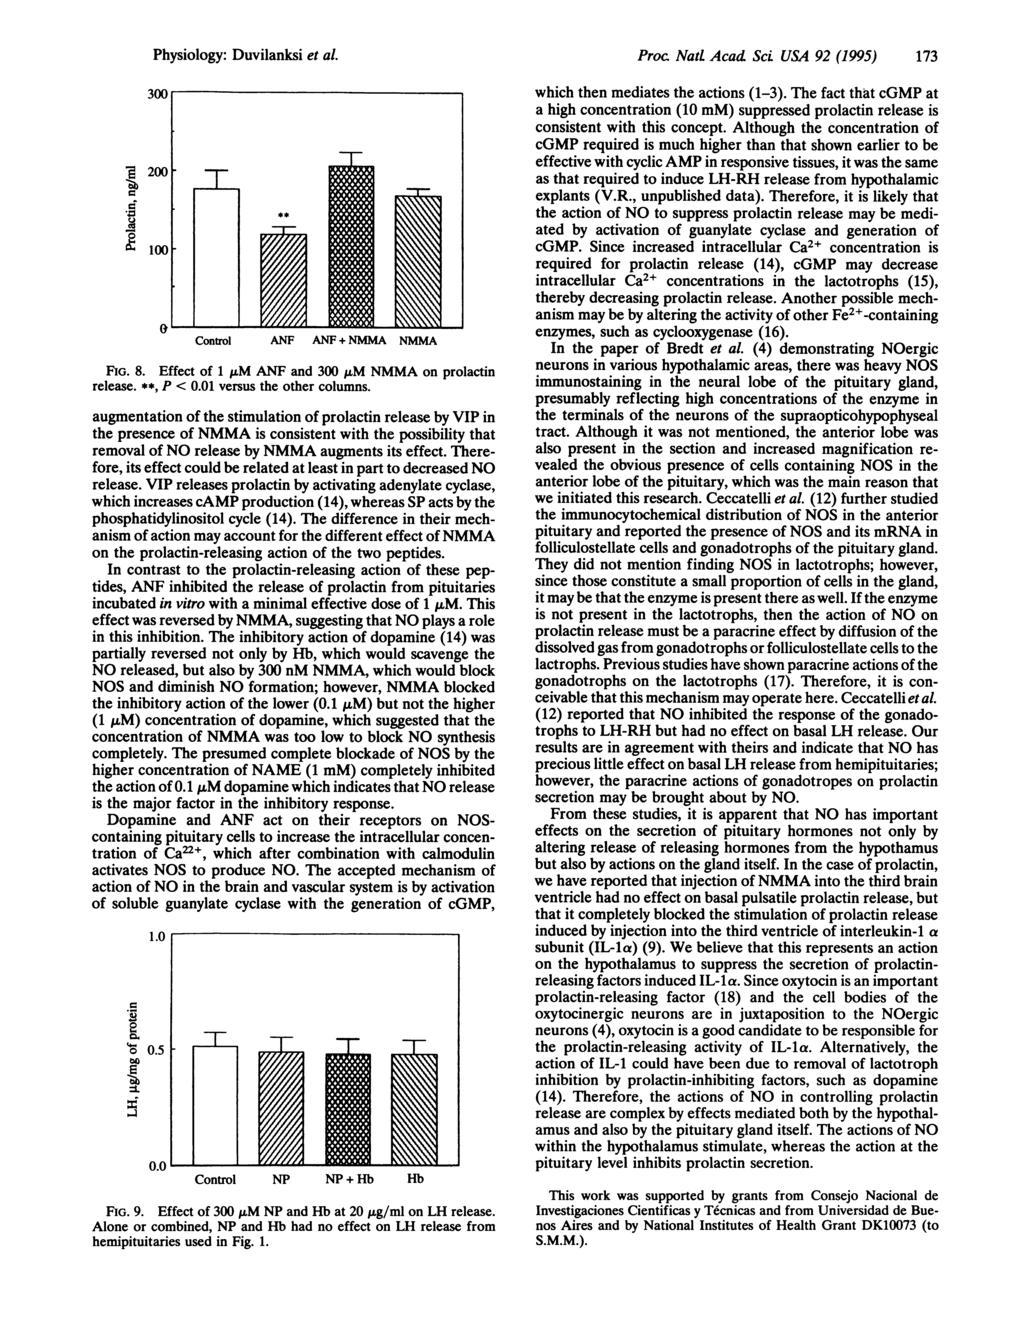 ~ ~1 Control ANF ANF + NMMA NMMA FIG. 8. Effect of 1 ILM ANF and 3 I.M NMMA on prolactin release. **, P <.1 versus the other columns.